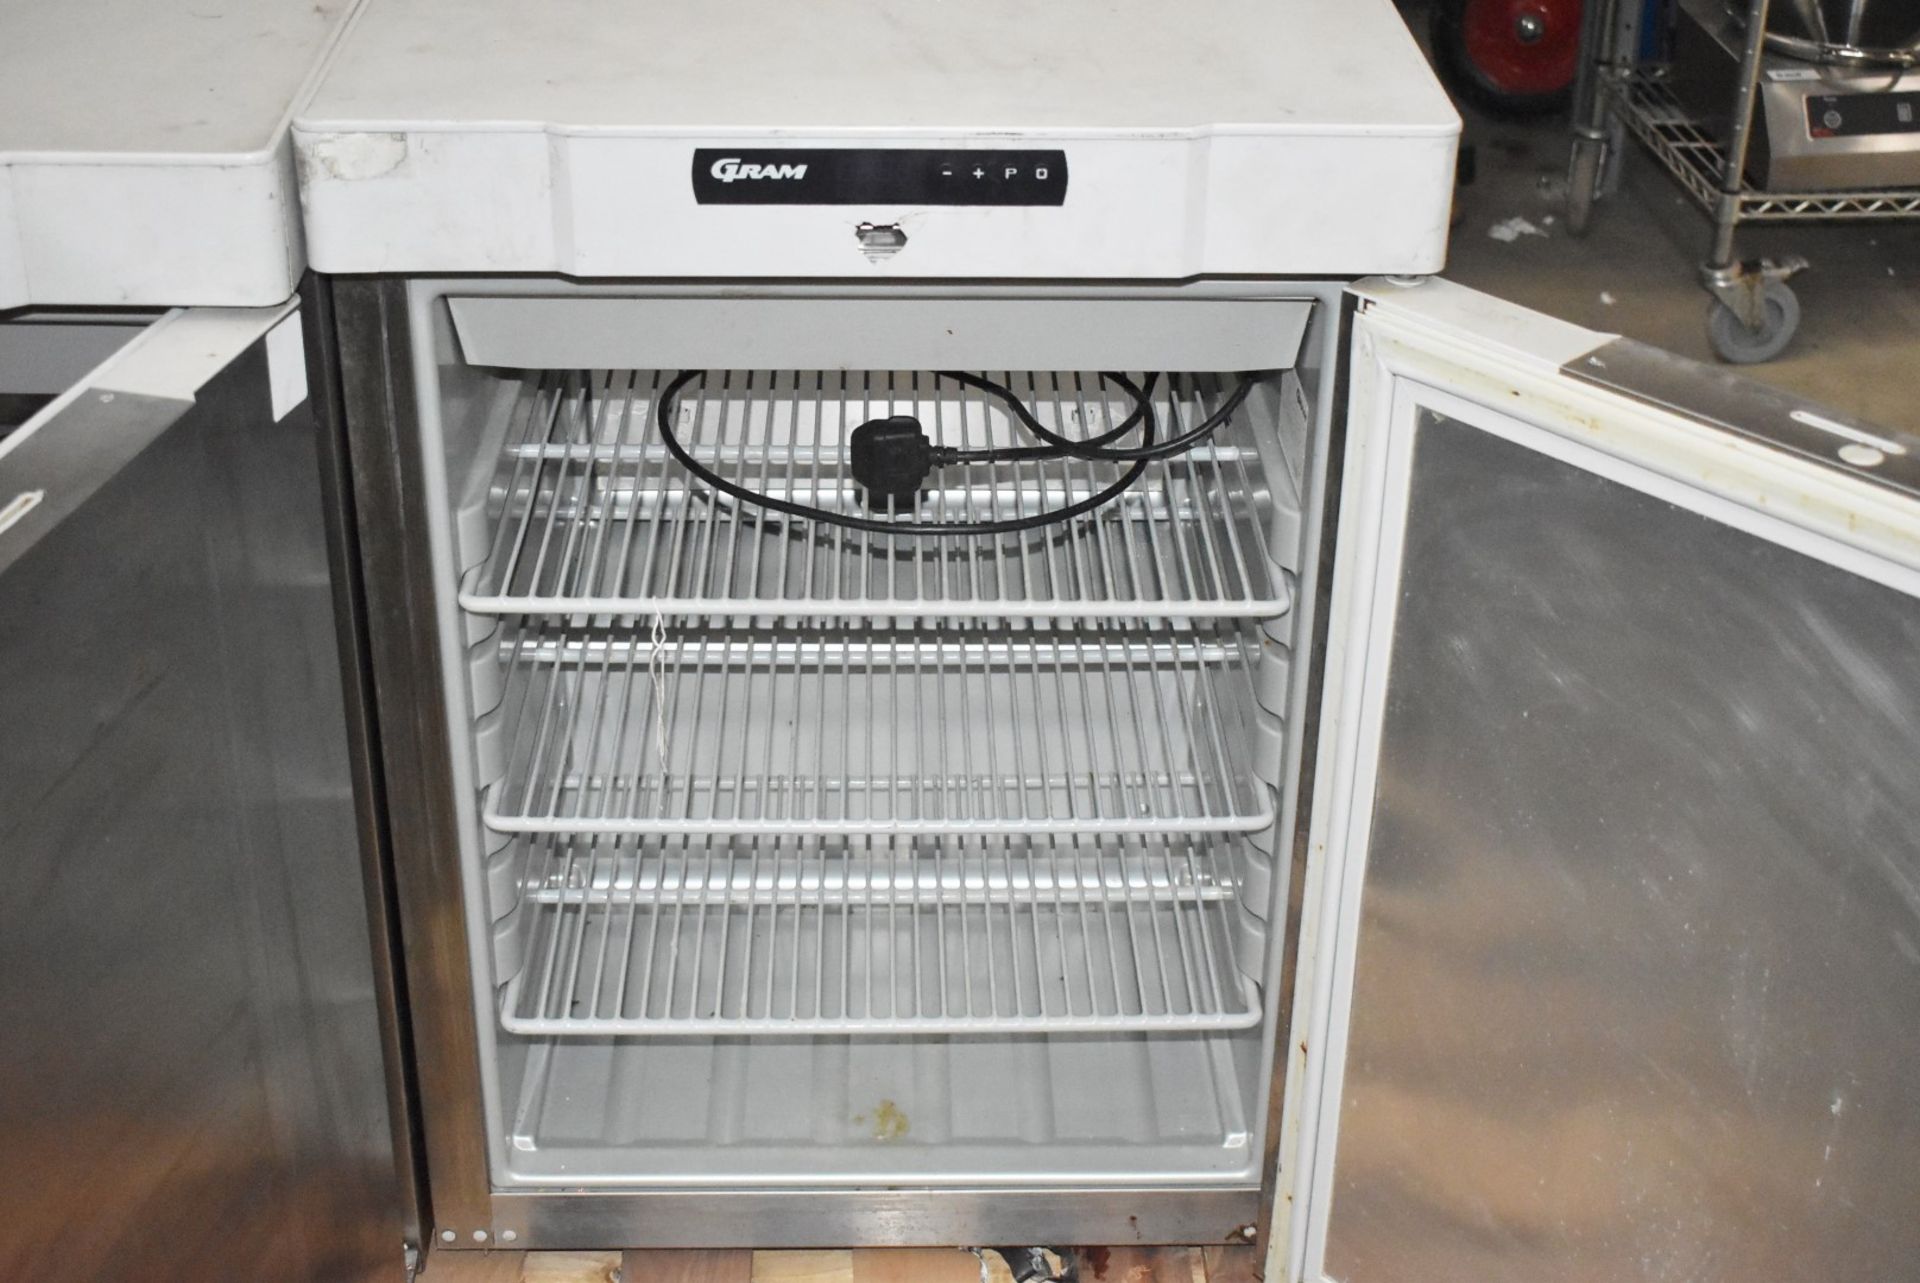 2 x Gram F 210 RG 3N 125 Ltr Undercounter Freezers - Recently Removed From a Restaurant - Image 6 of 8